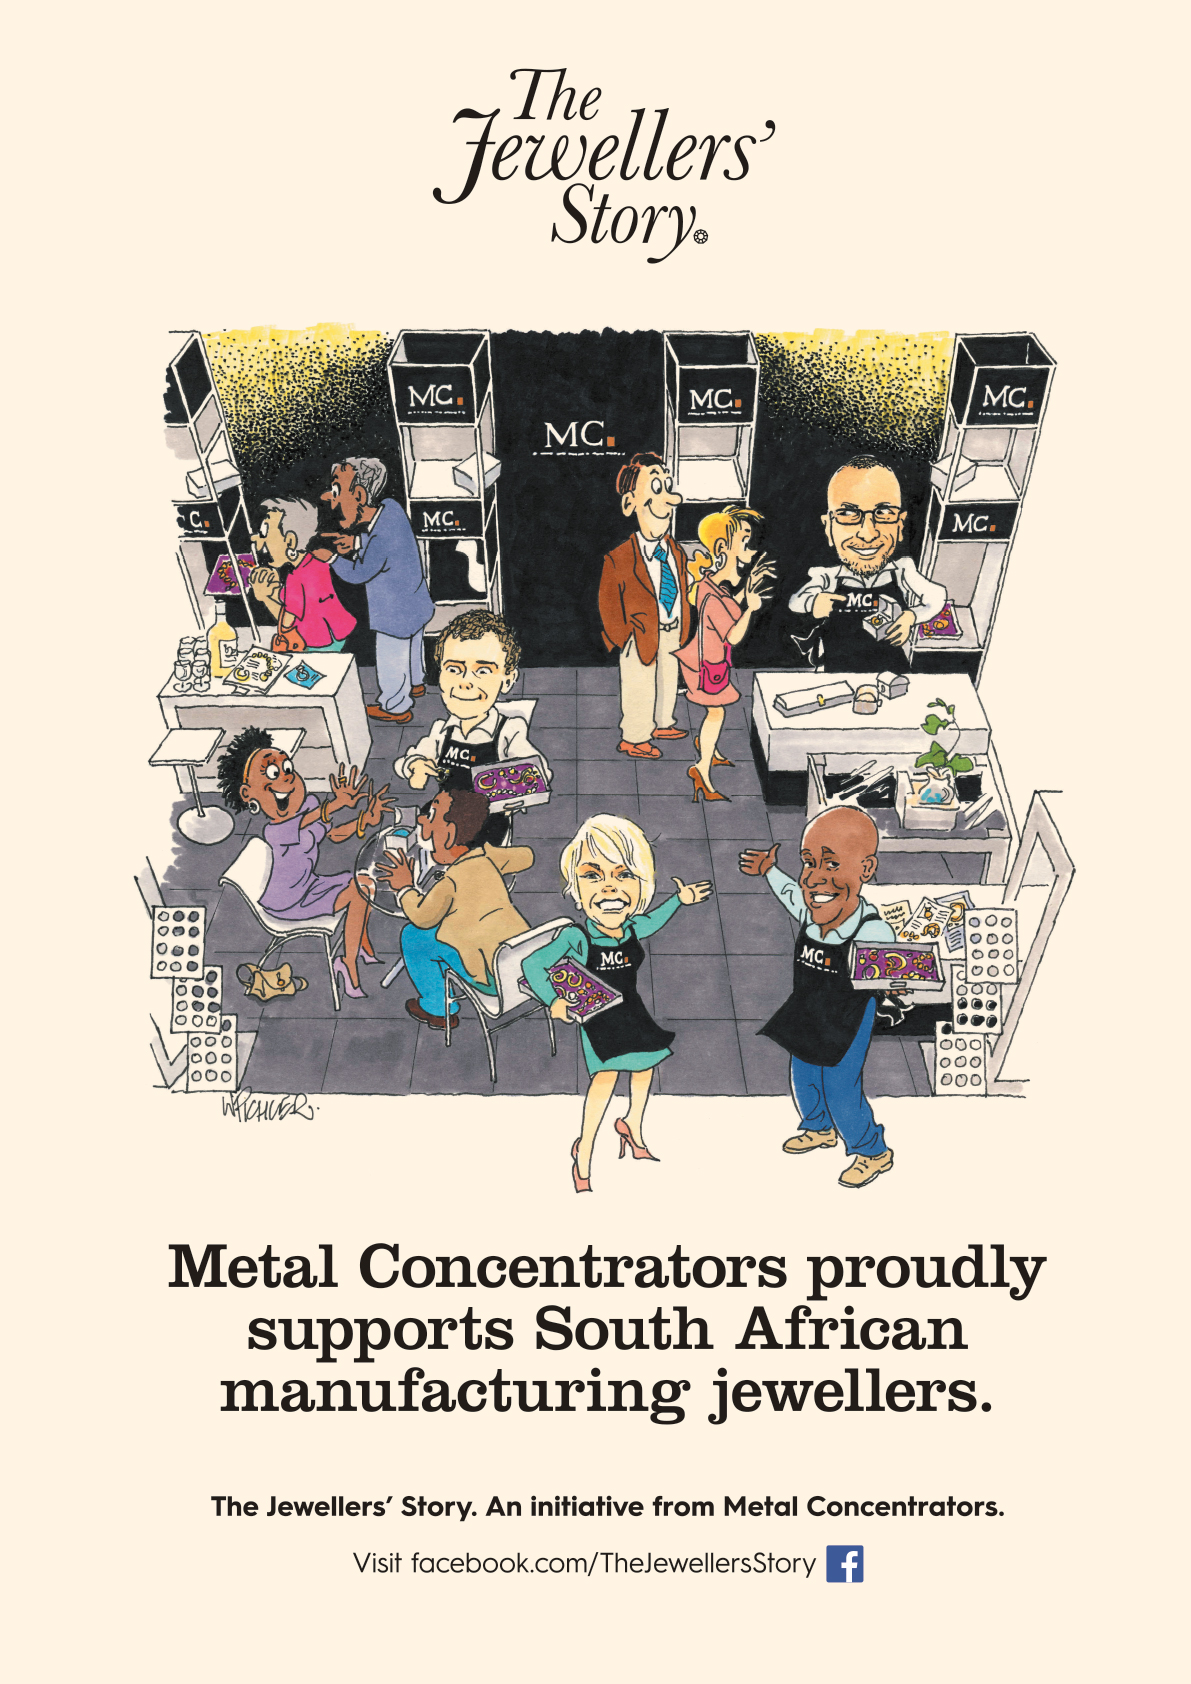 Metal Concentrators proudly supports South African manufacturing jewellers